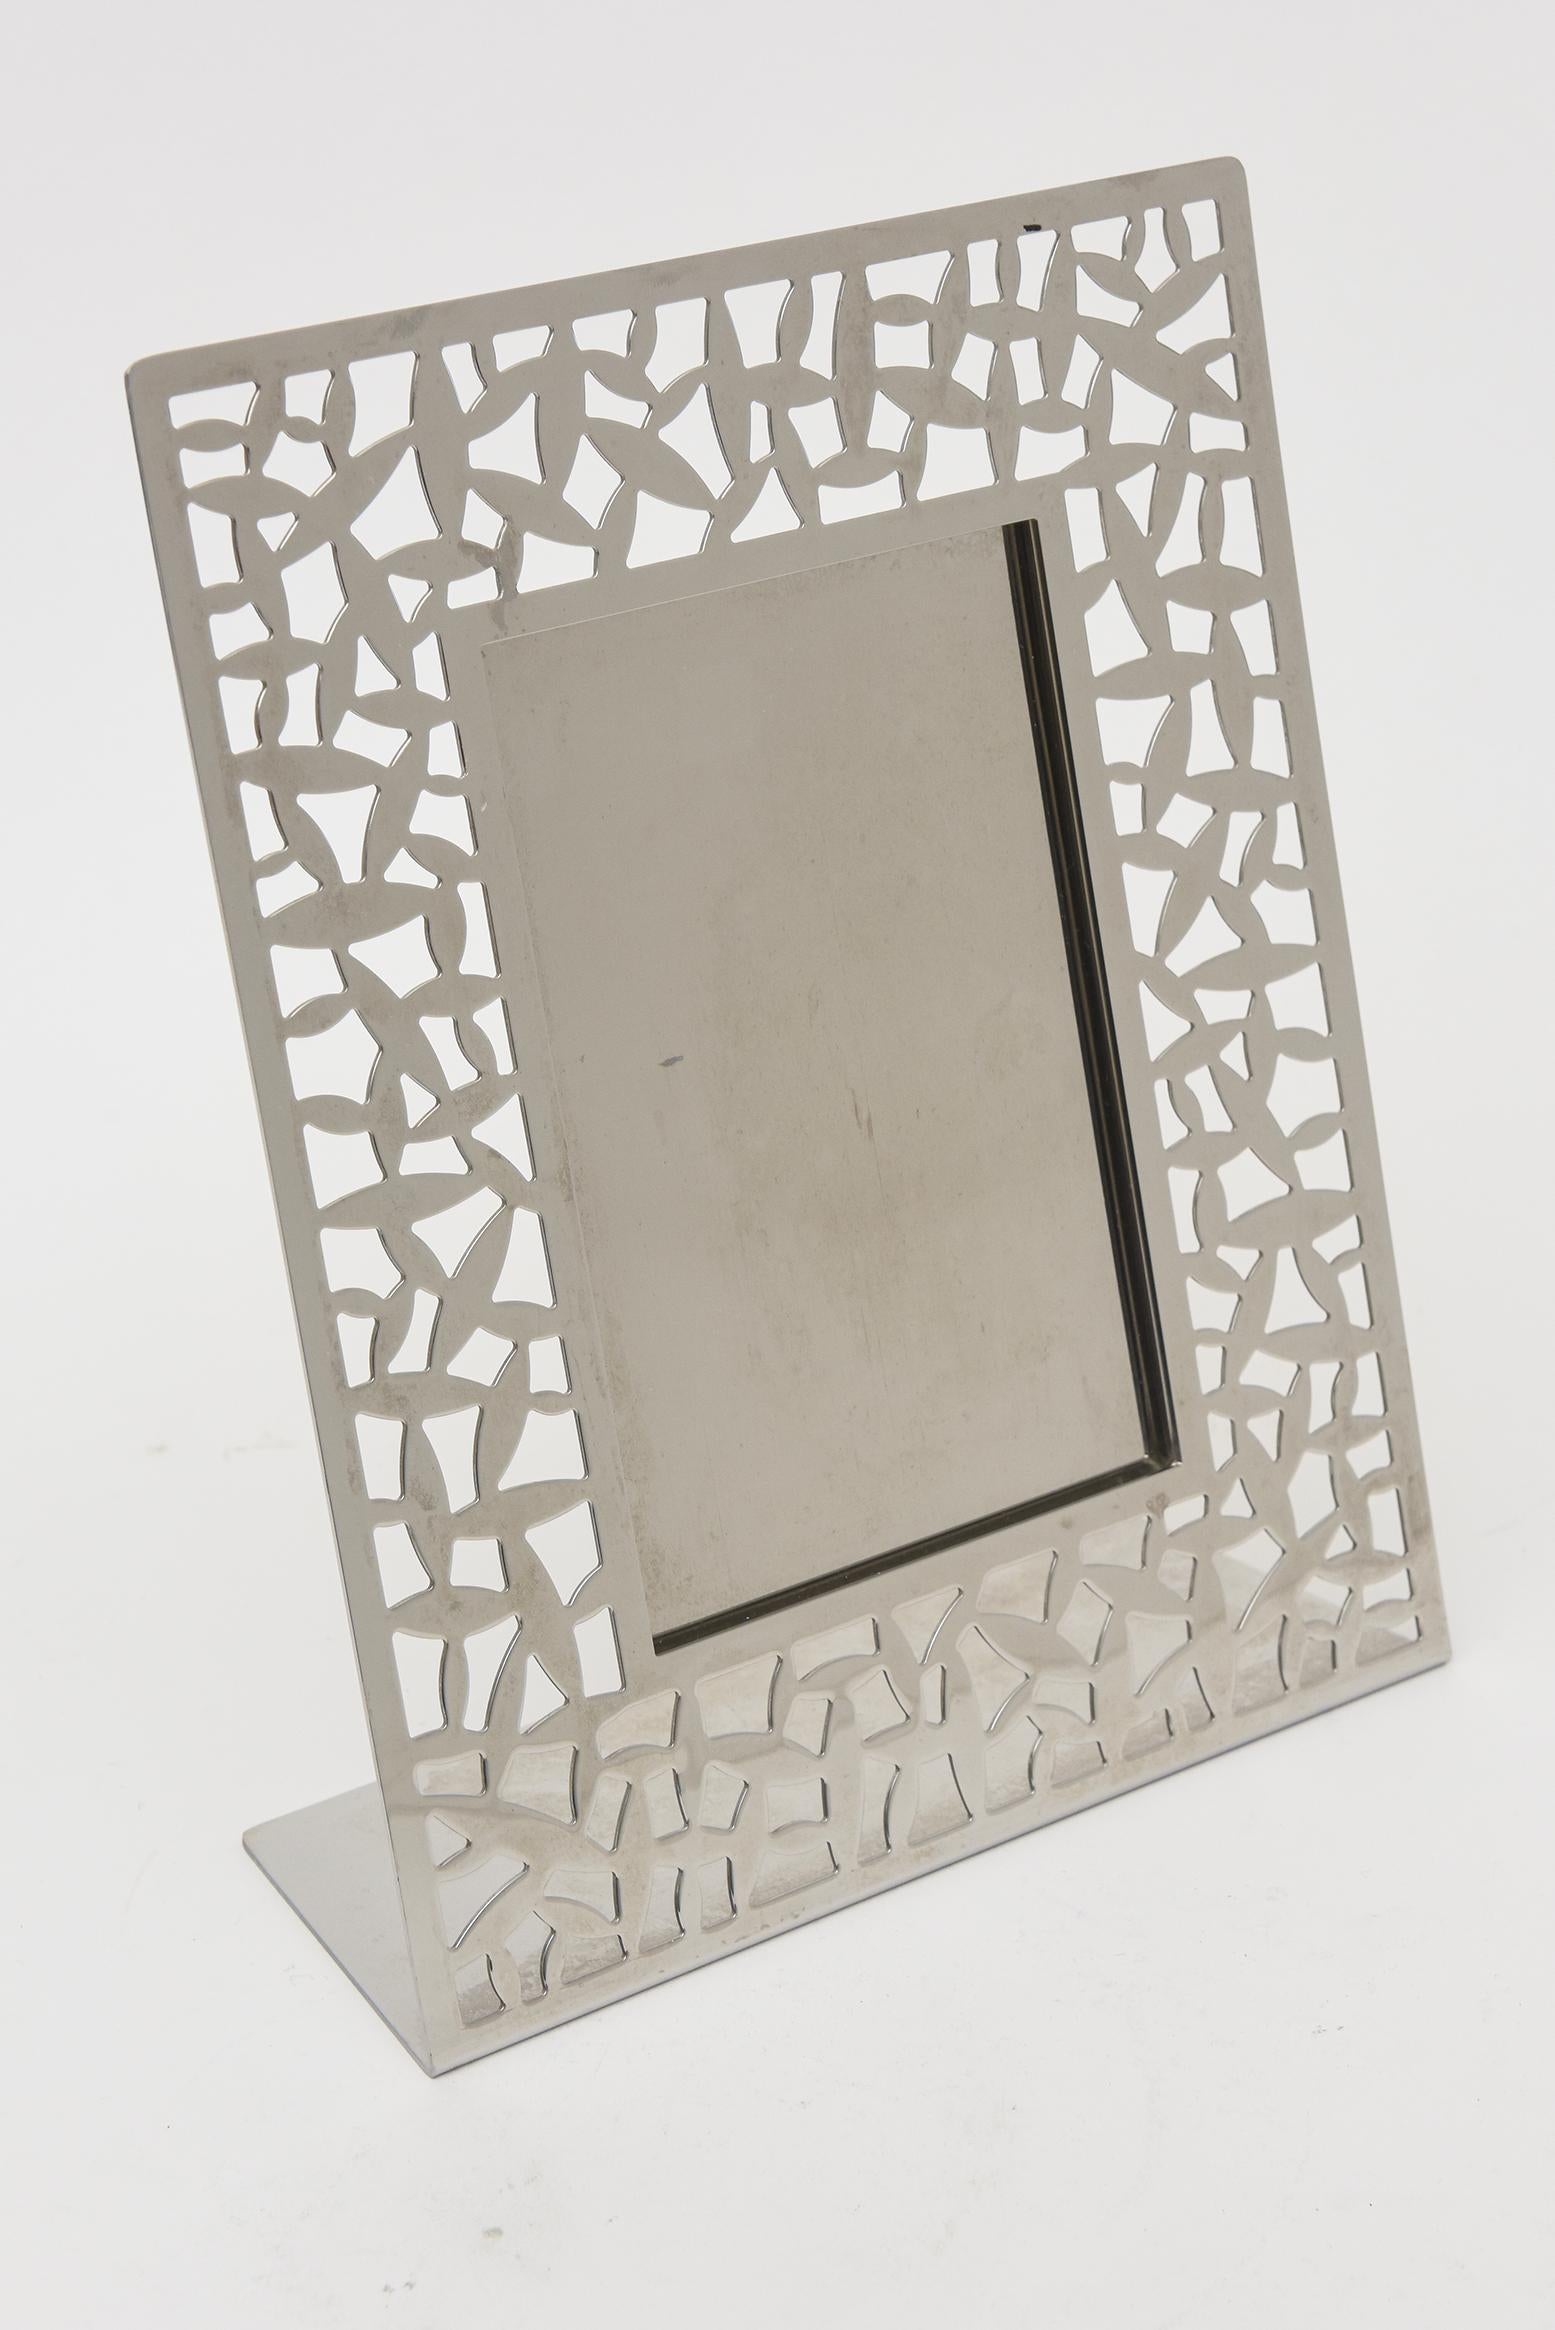 This fabulous Italian stainless steel picture frame by Alessi is all hallmarked. The pattern is called cactus and is modern looking and abstract. It is now a discontinued piece. It reads Alessi ItalyCSA M Sansoni 2004 Inox 18-10. From 2004. These